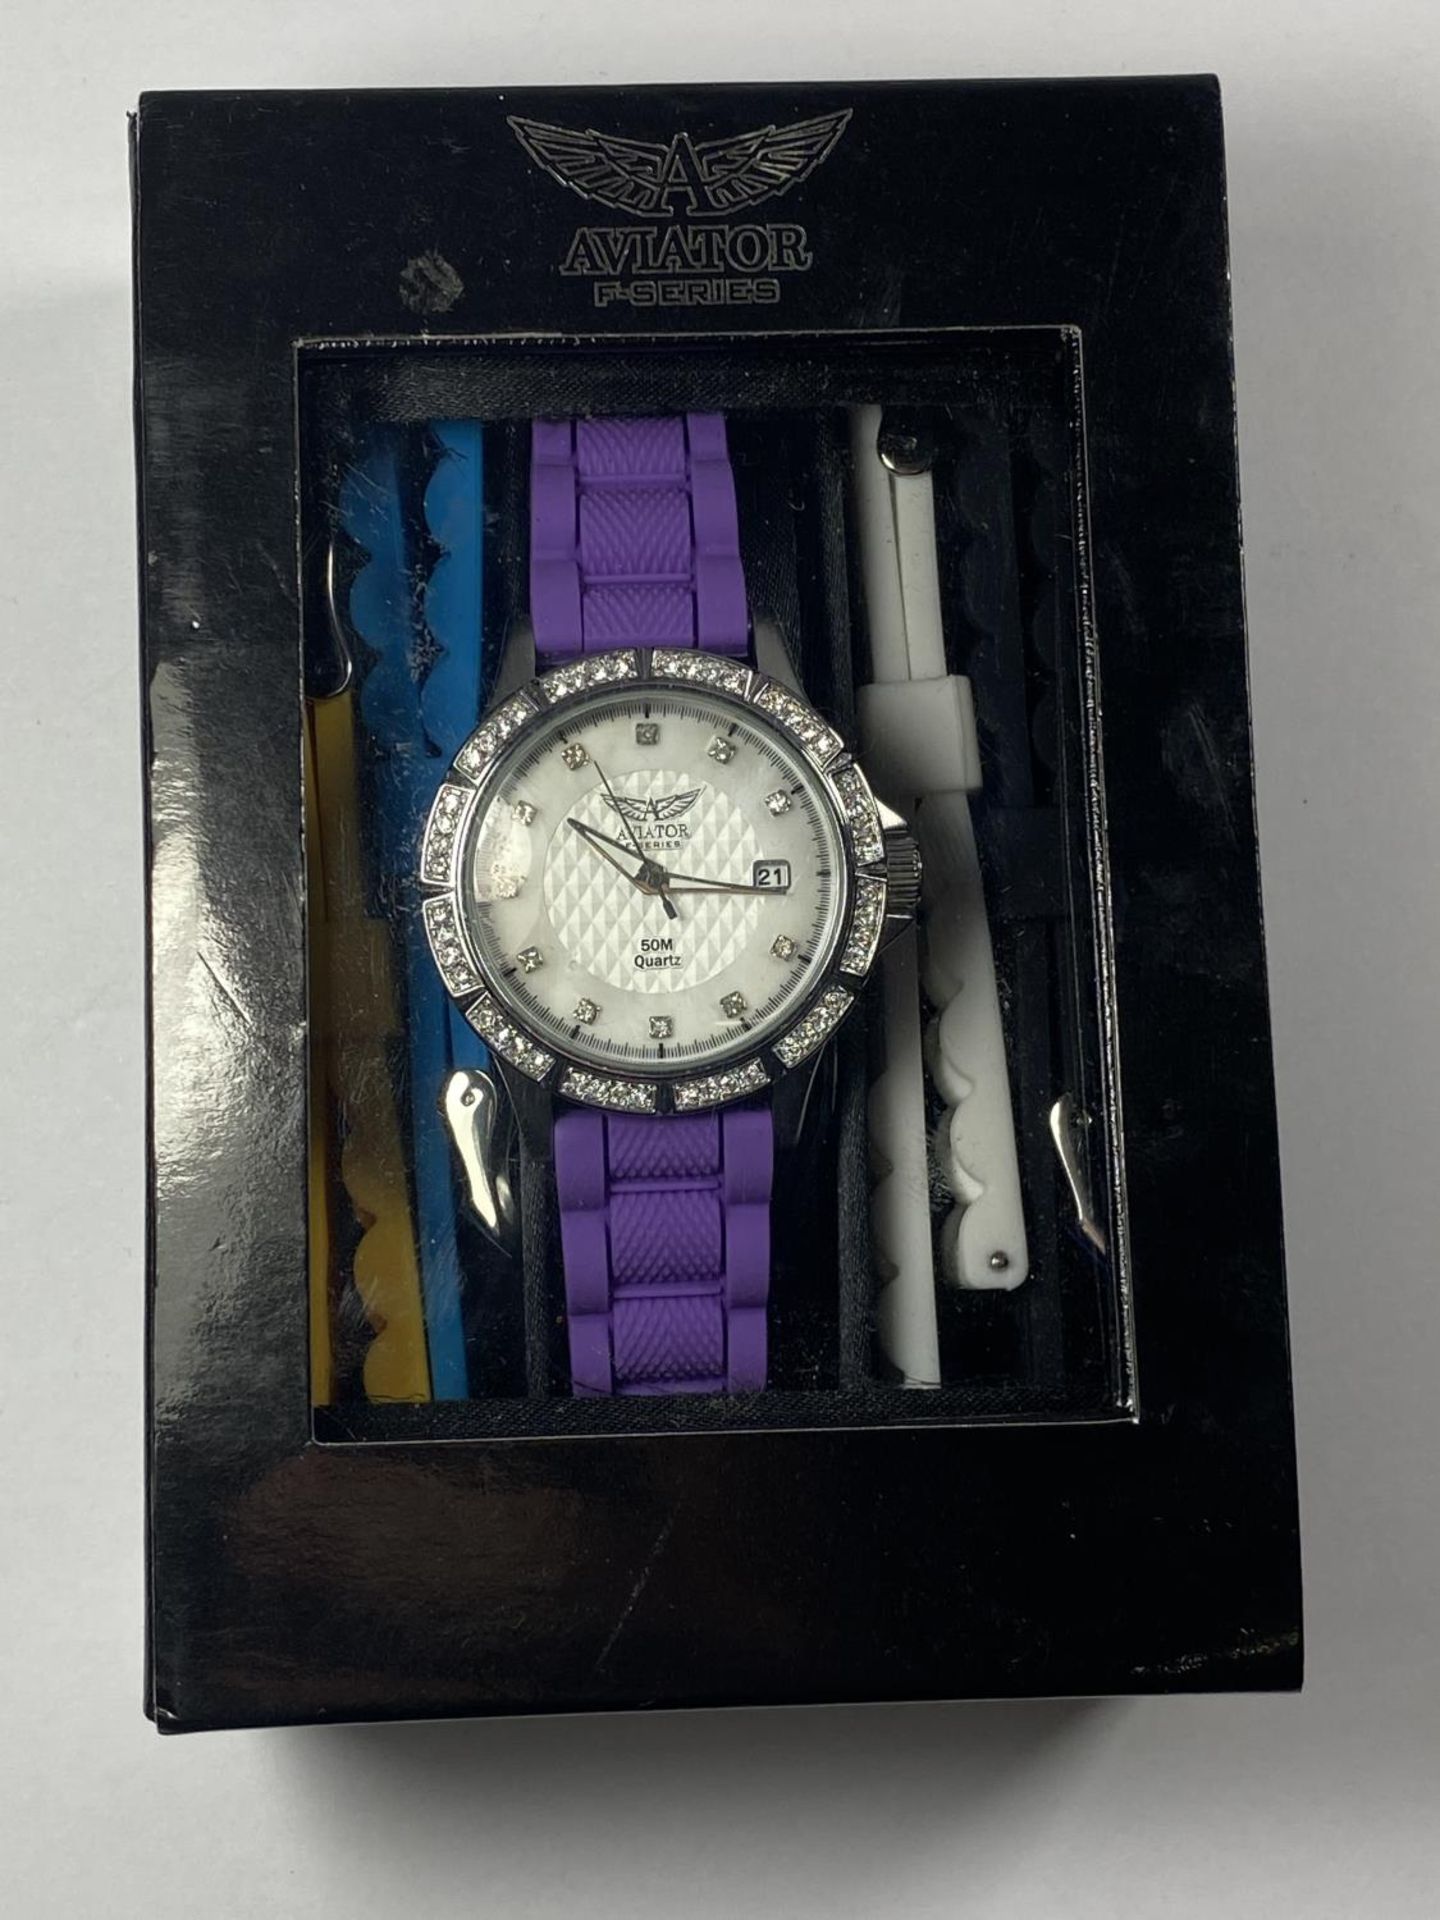 AN AVIATOR WRIST WATCH WITH INTER CHANGABLE STRAPS IN A PRESENTATION BOX - Image 2 of 4